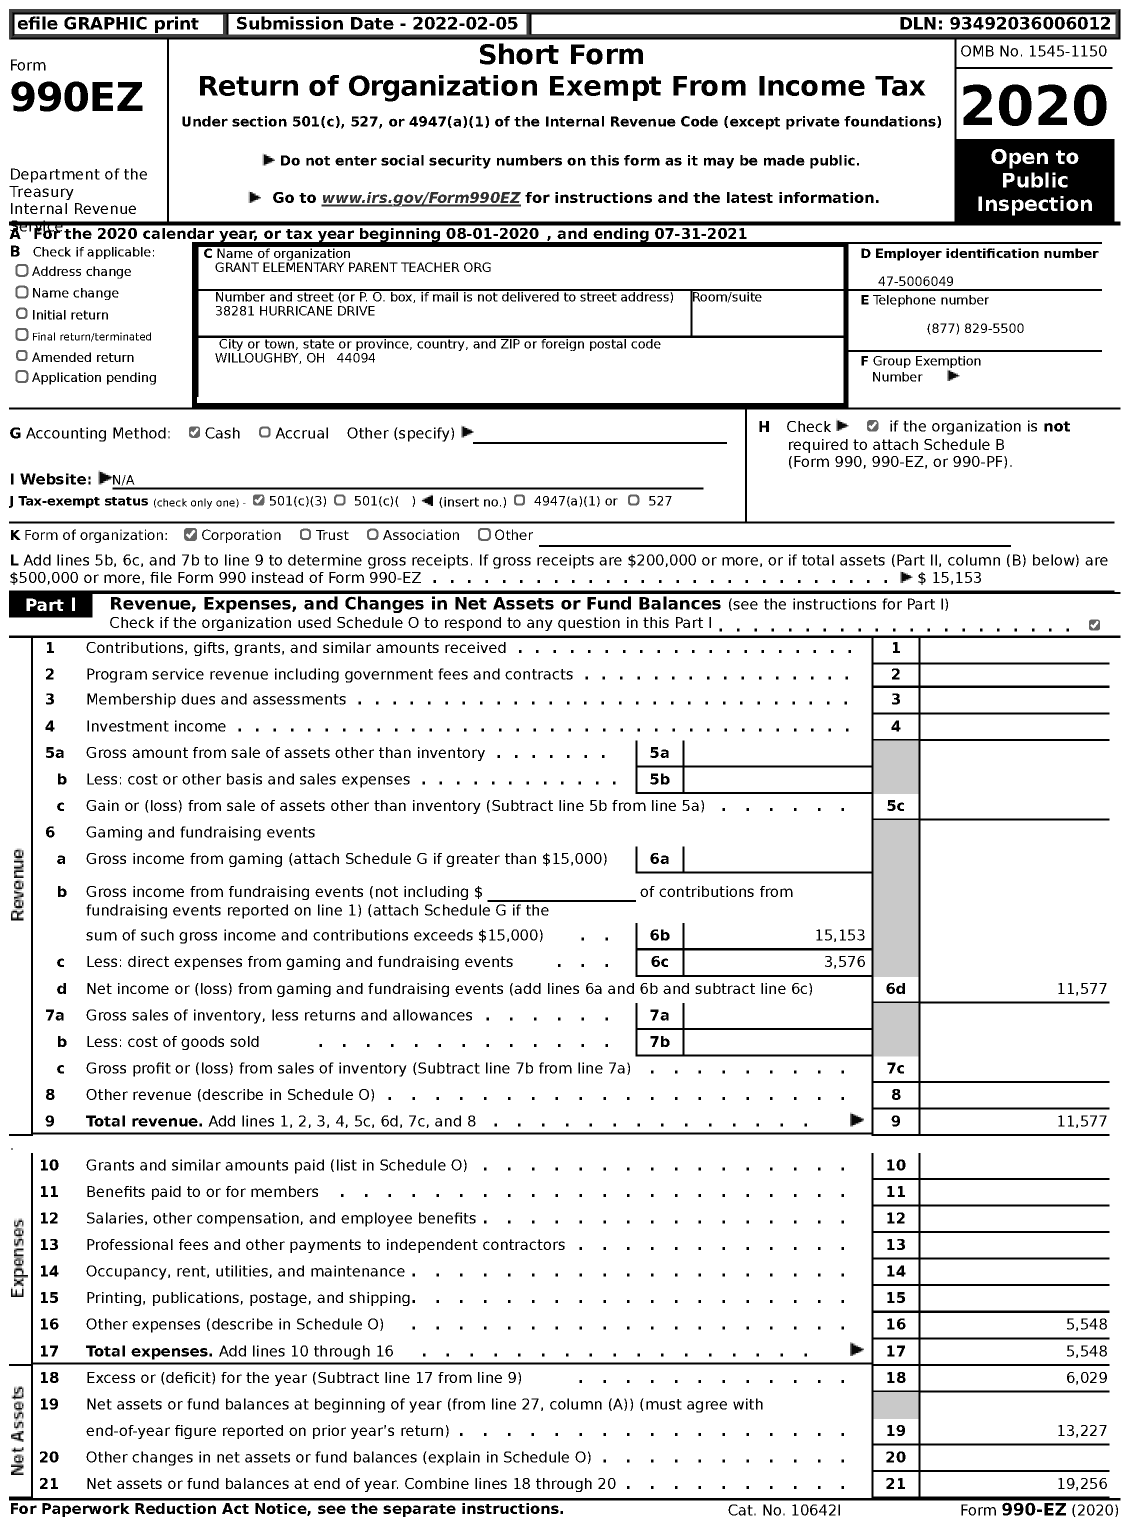 Image of first page of 2020 Form 990EZ for Grant Elementary Parent Teacher Org